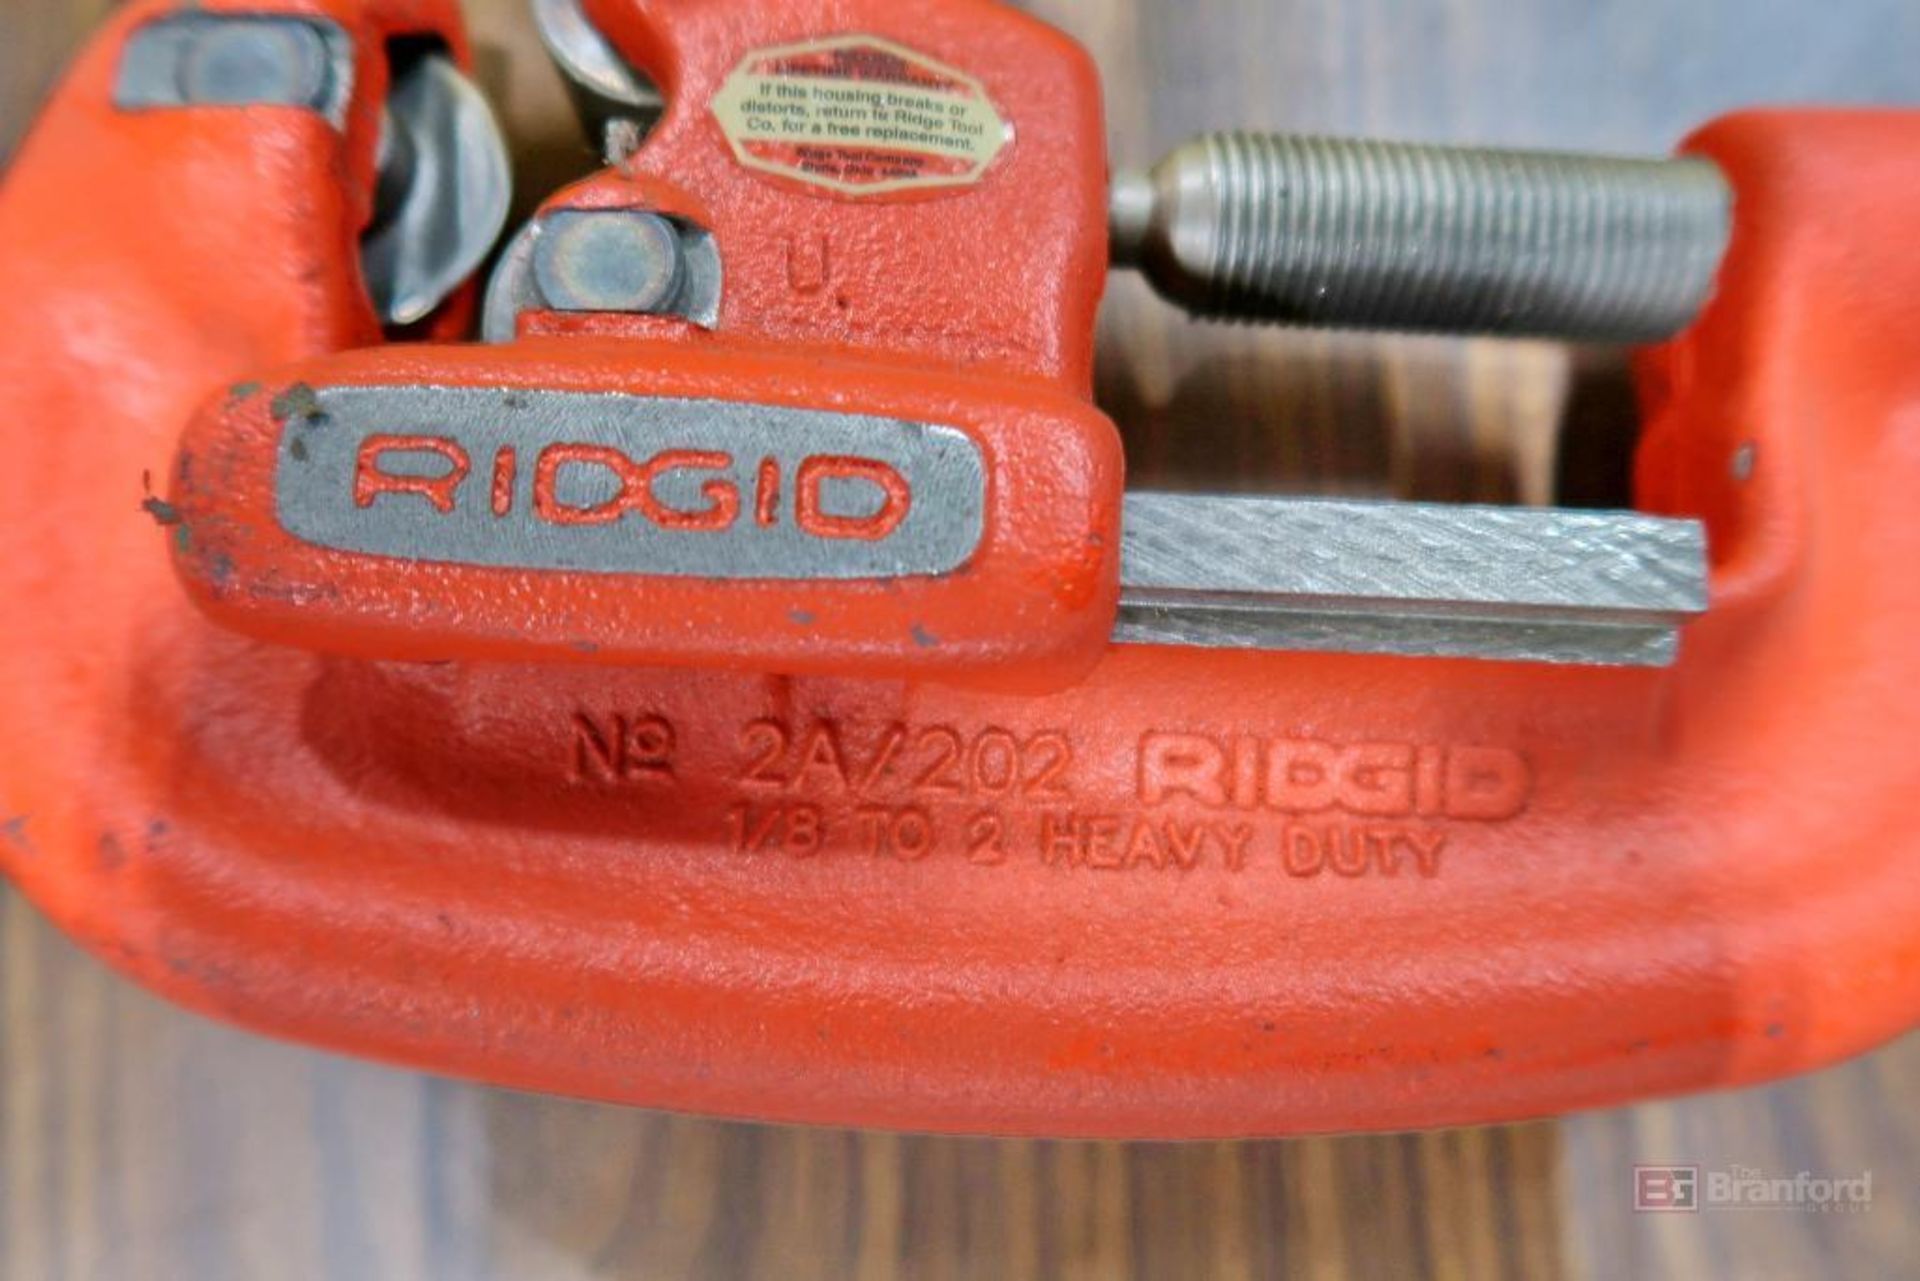 Ridgid 2A/202 Pipe Cutter - Image 2 of 2